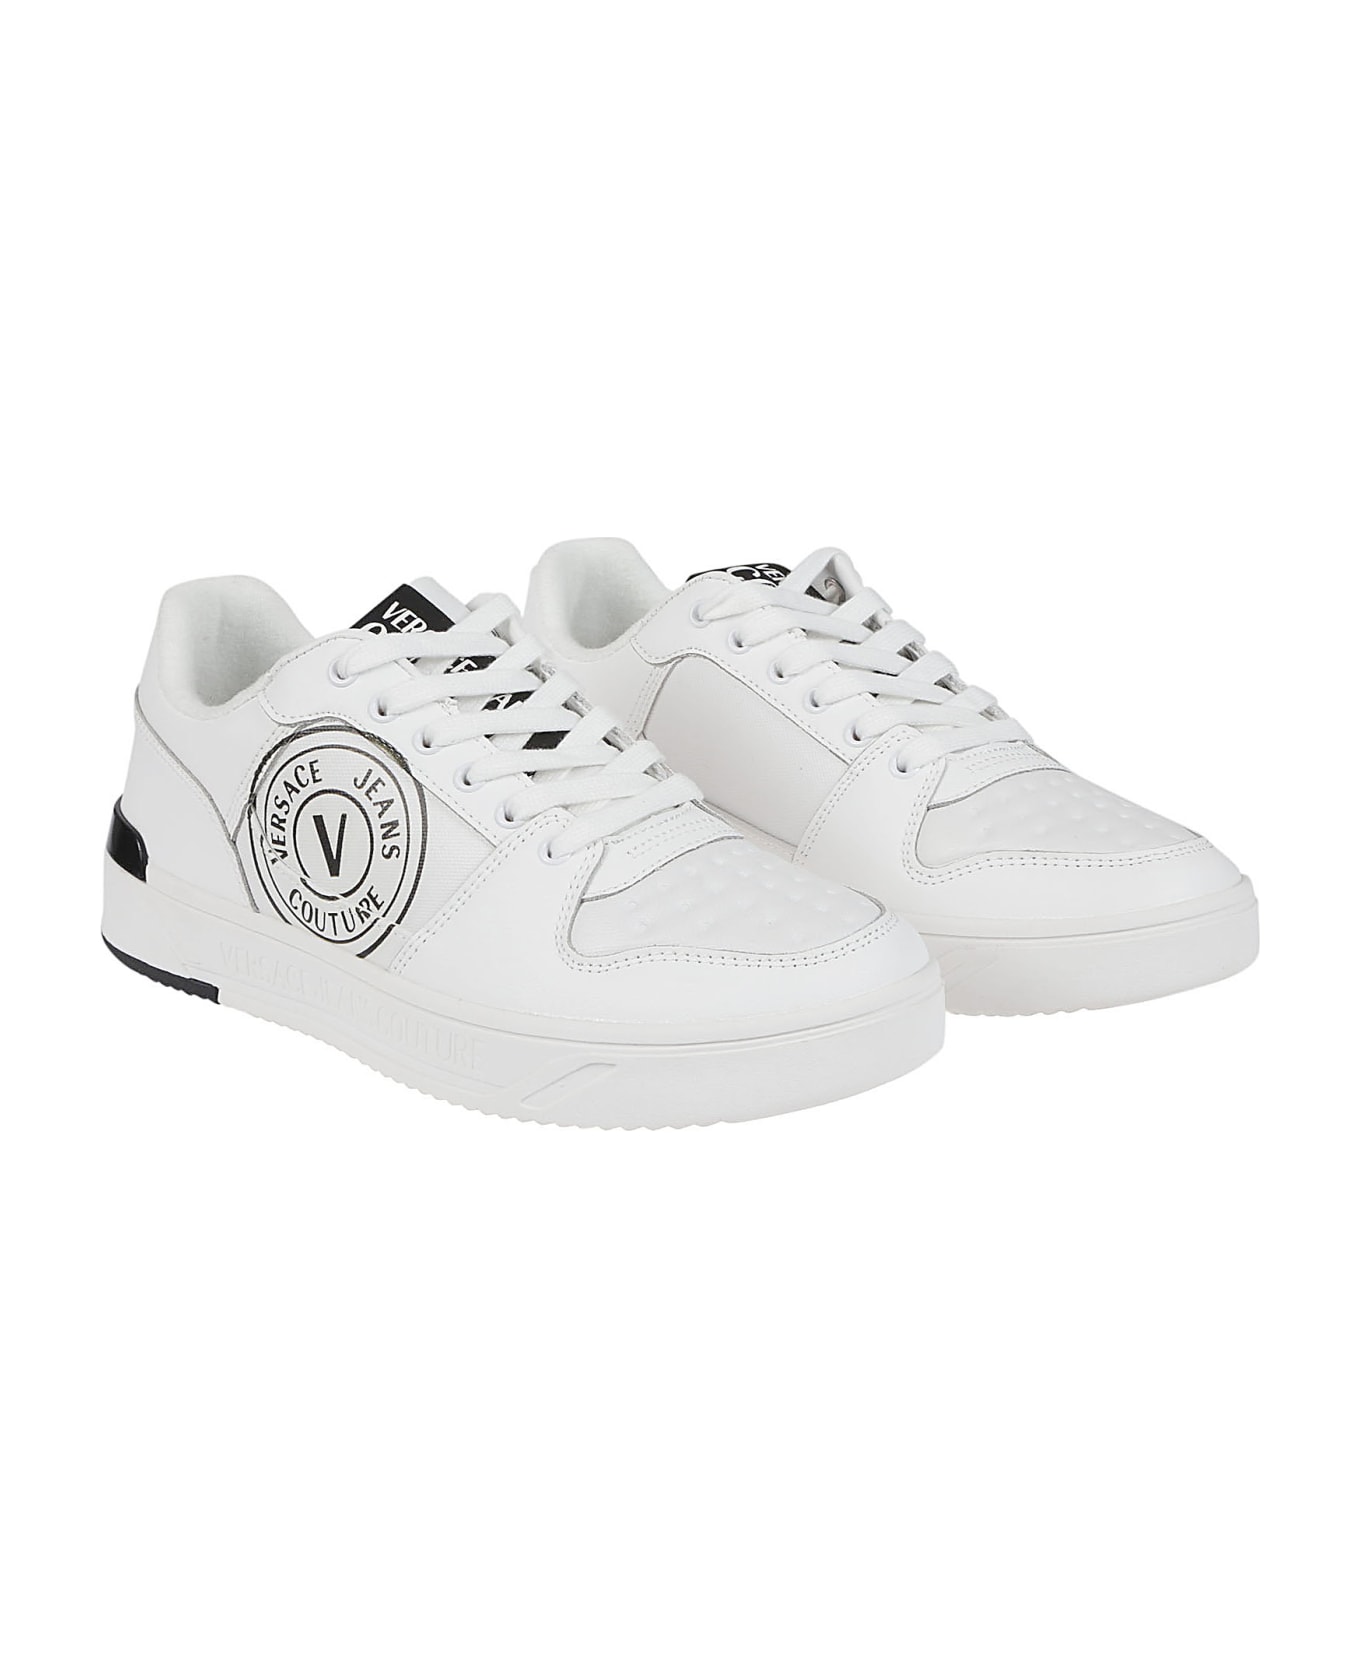 Versace Jeans Couture Starlight Sj1 Sneakers - White